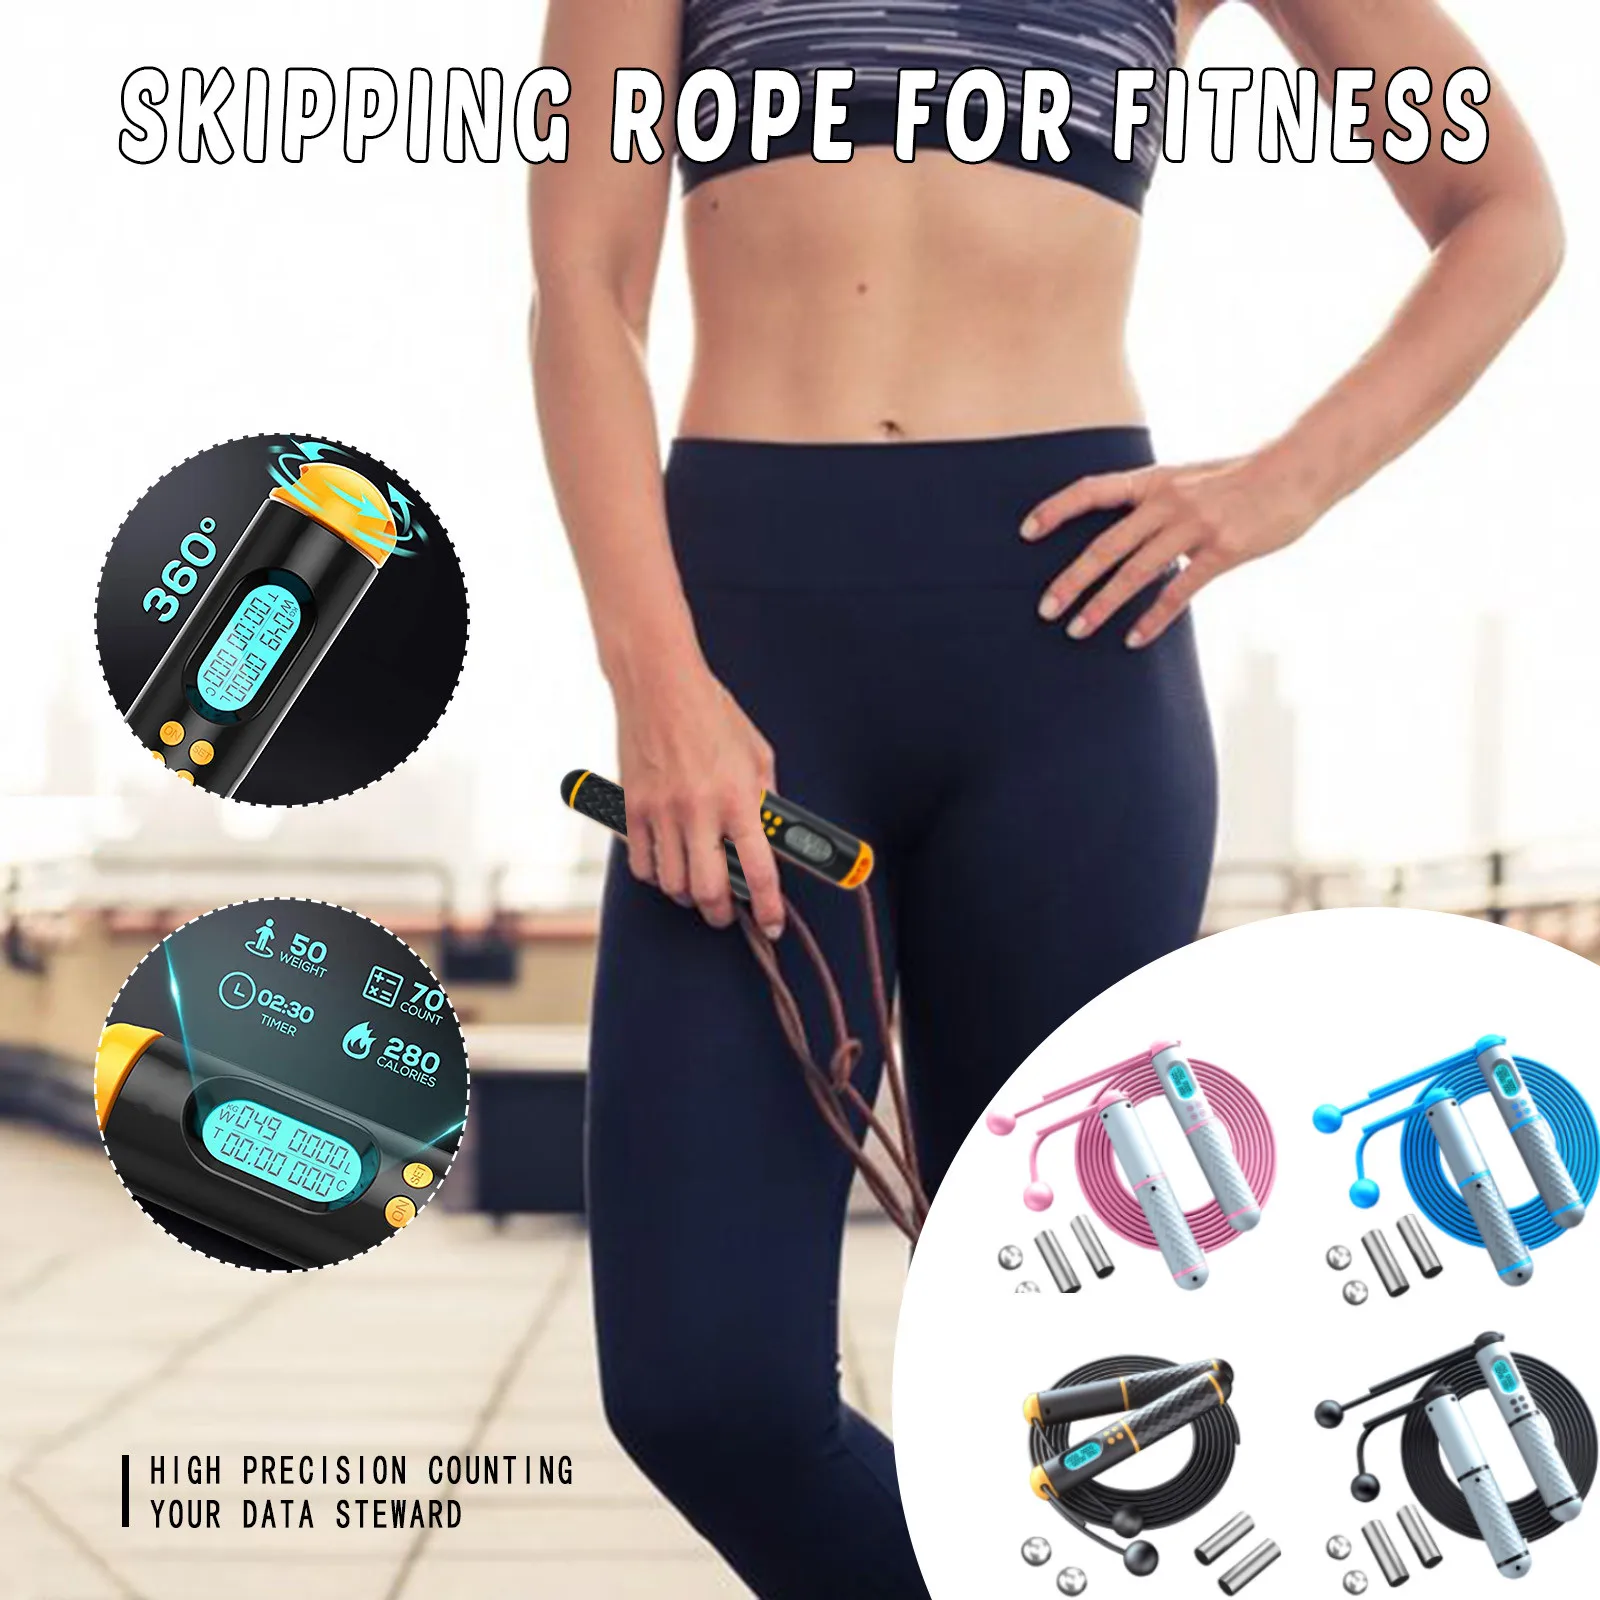 

Smart Skipping Rope With Digital Calorie Counter Weight Bearing Skipping Speed Jump Ropes Cordless For Fitness